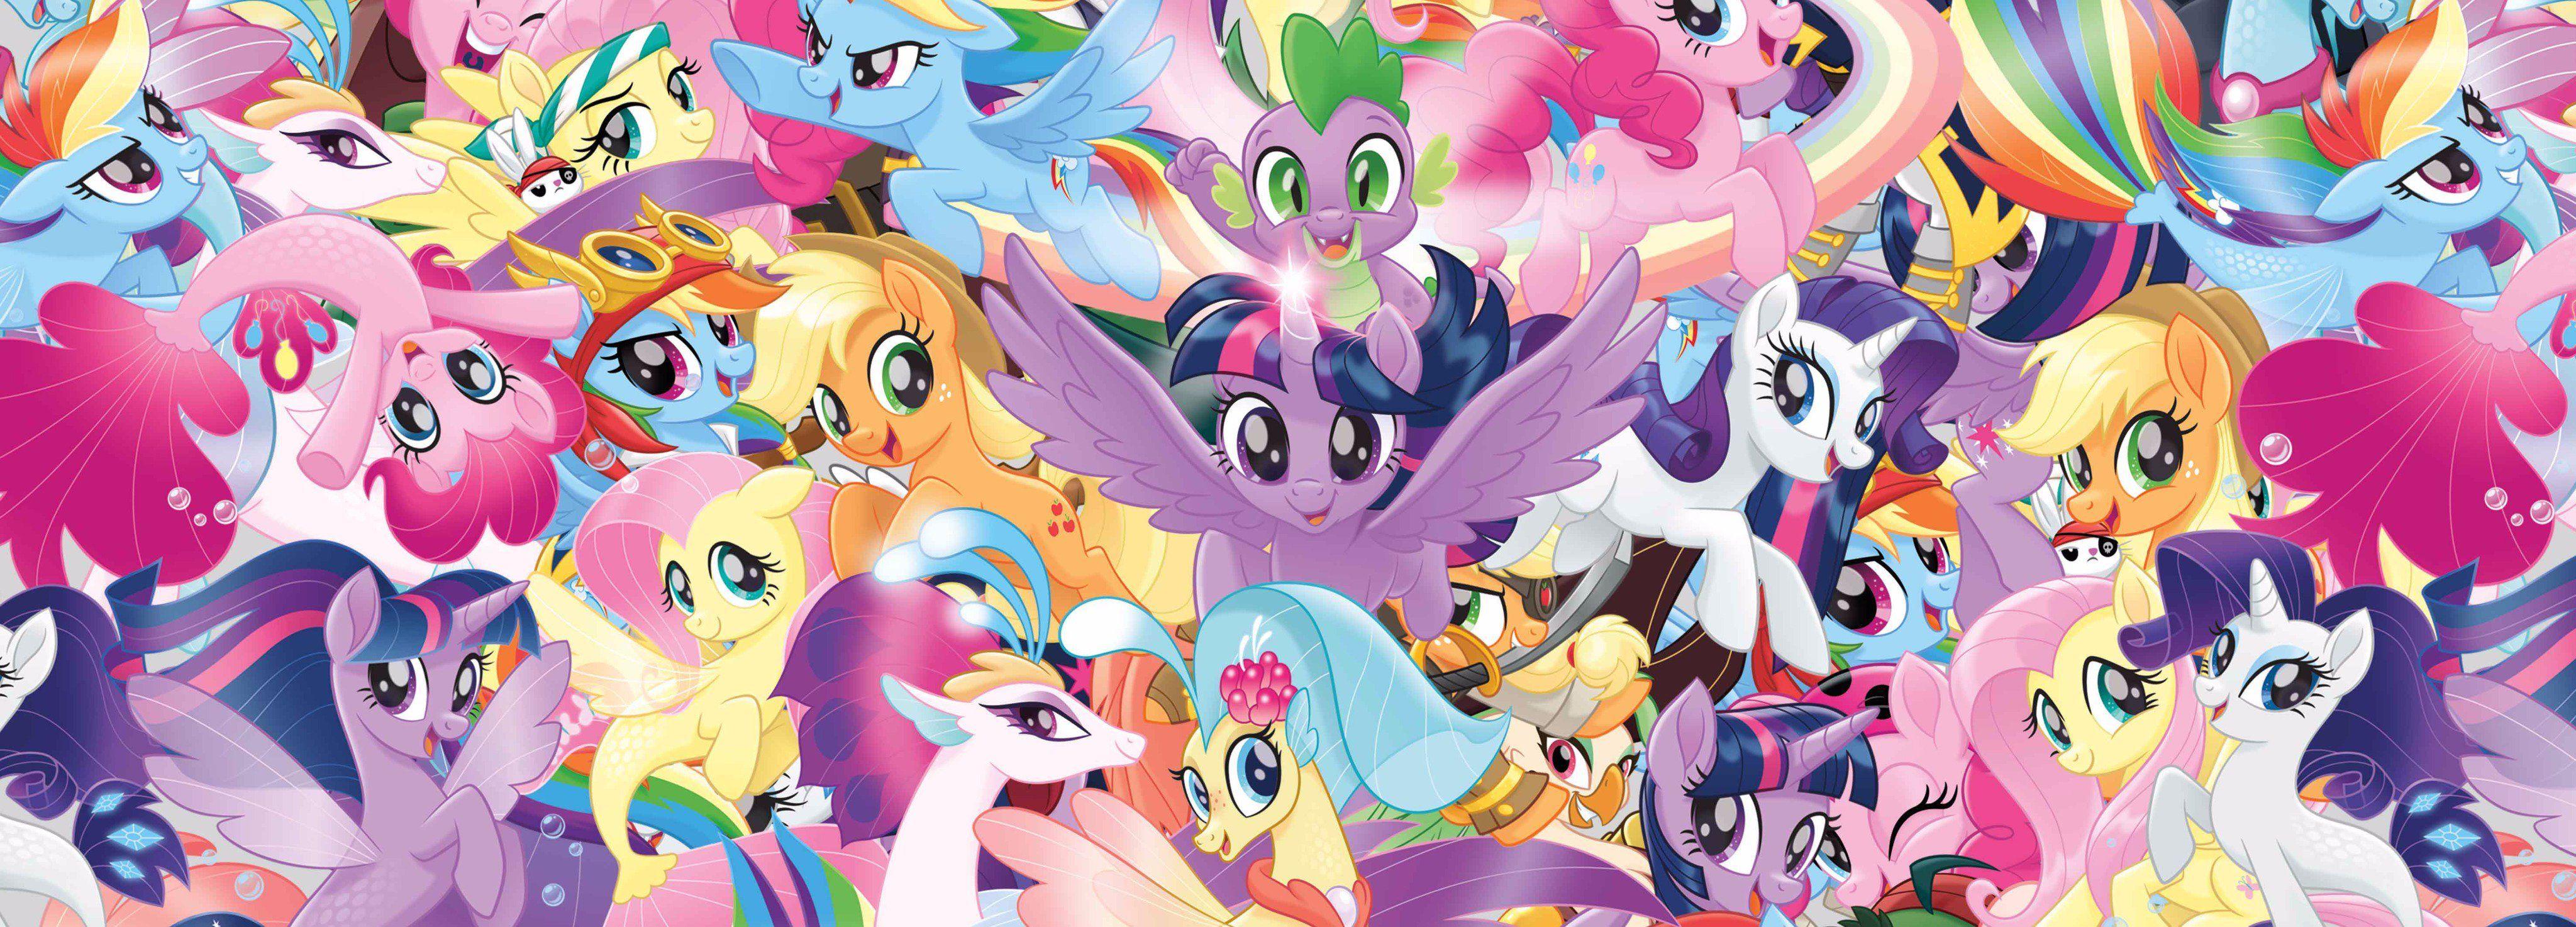 MLP The Movie character. My Little Pony